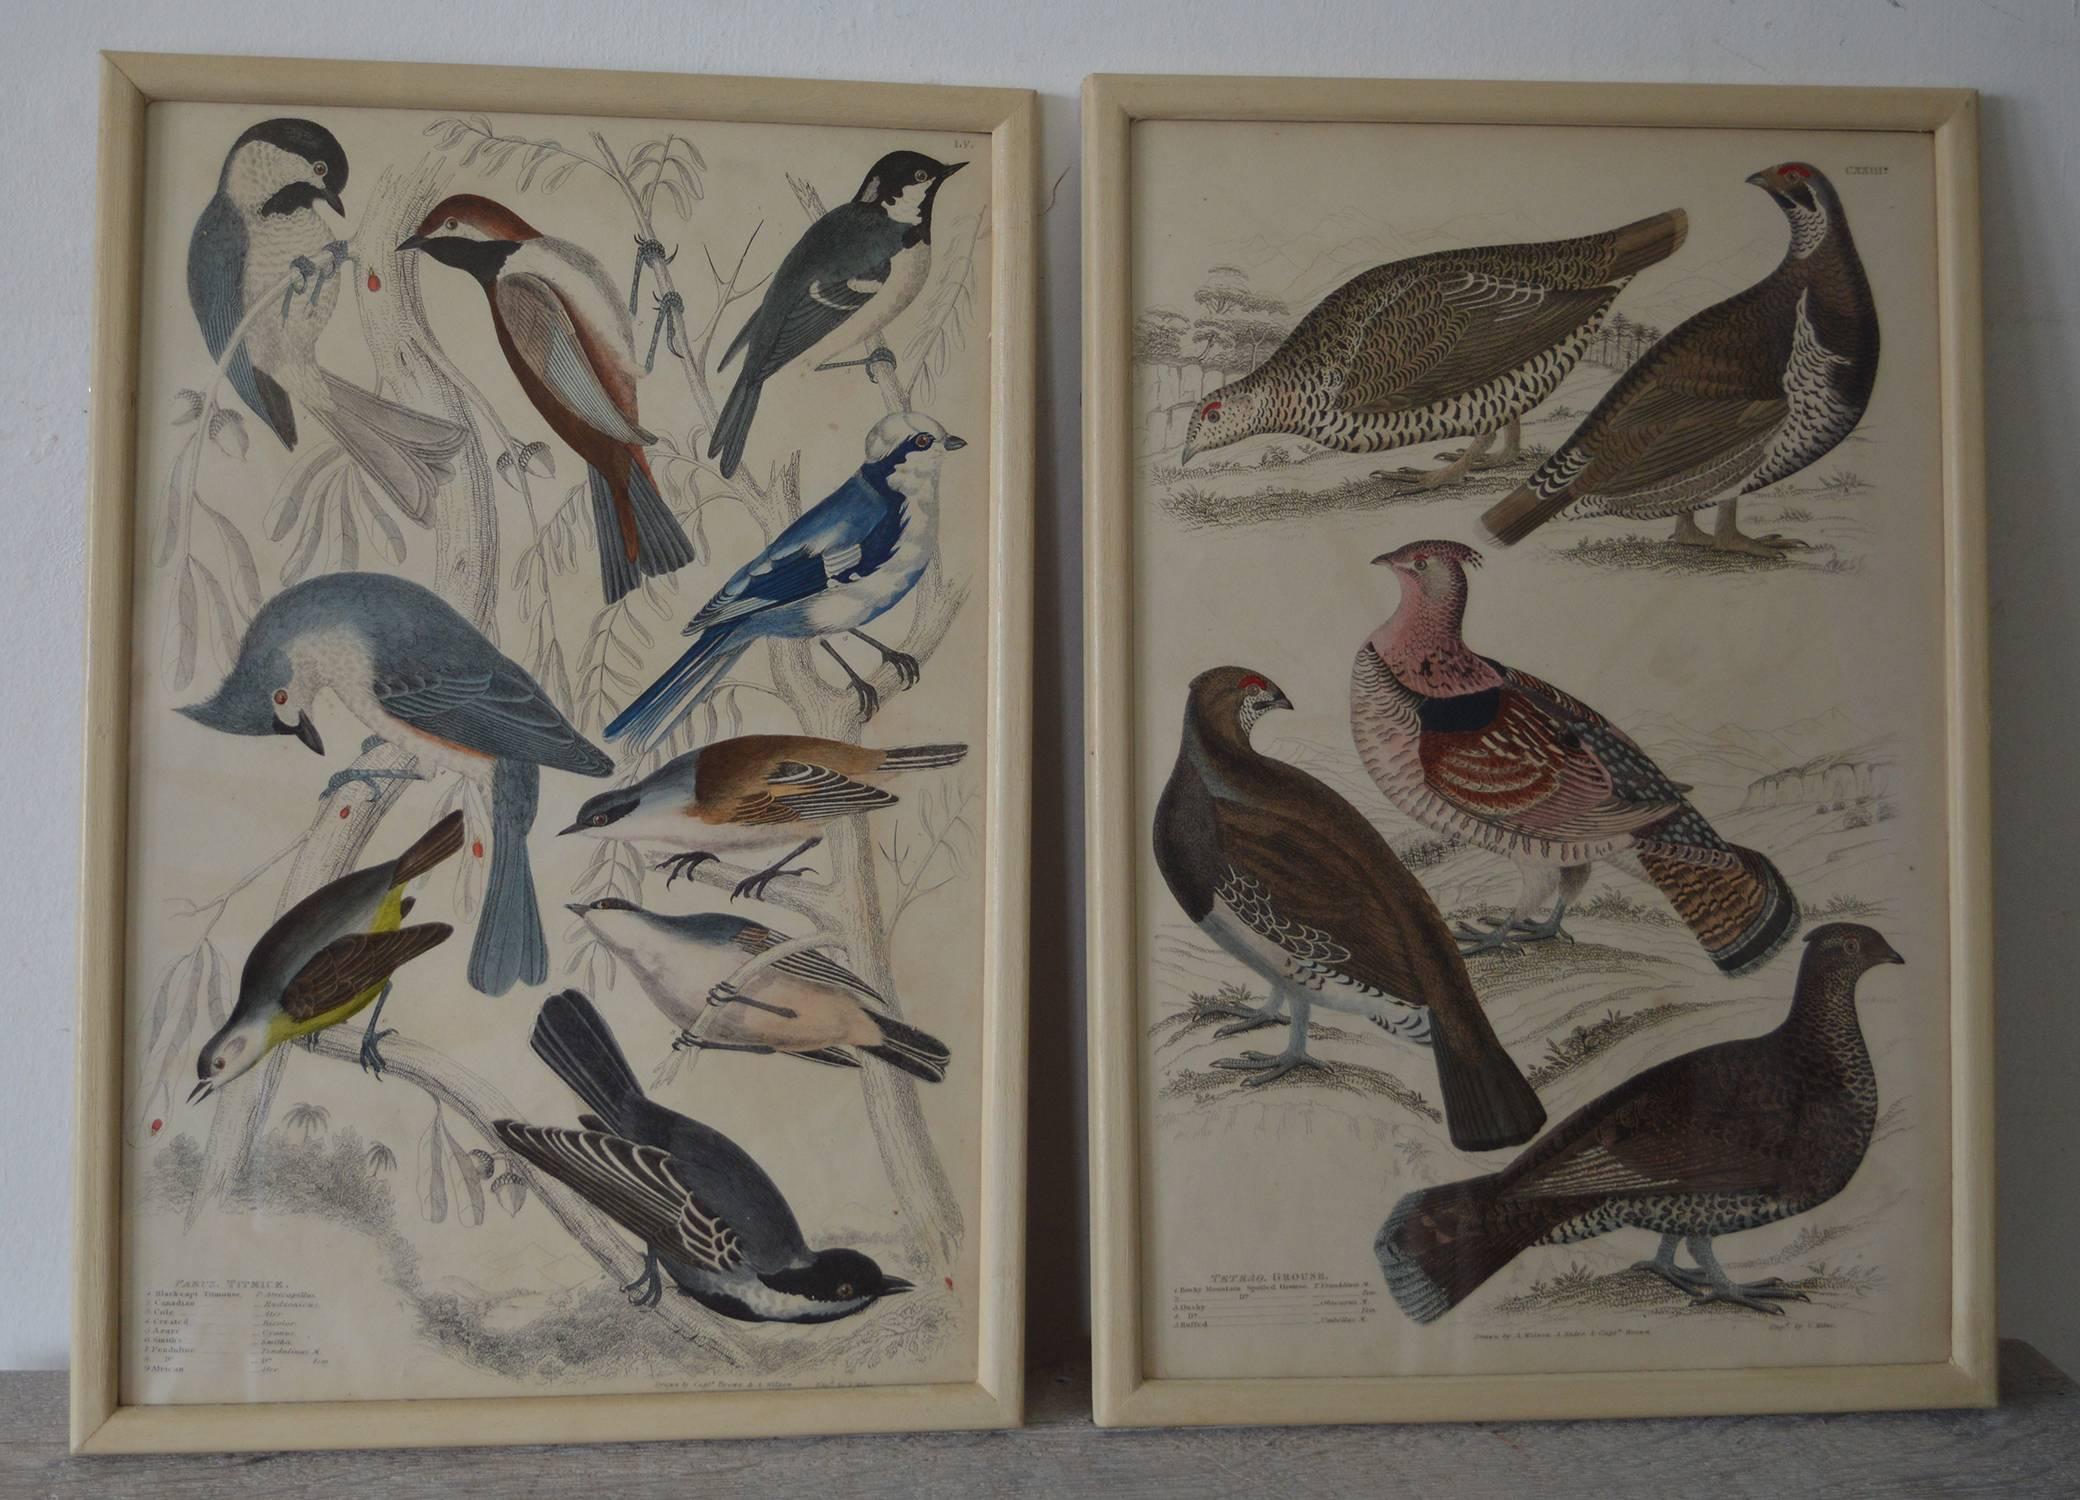 Wonderful set of 18 antique bird prints in exquisite muted colors.

Presented in our own custom made faux ivory frames.

Lithographs after the original drawings by Captain Brown. Original hand color.

Published 1830s.

6 are slightly larger. The